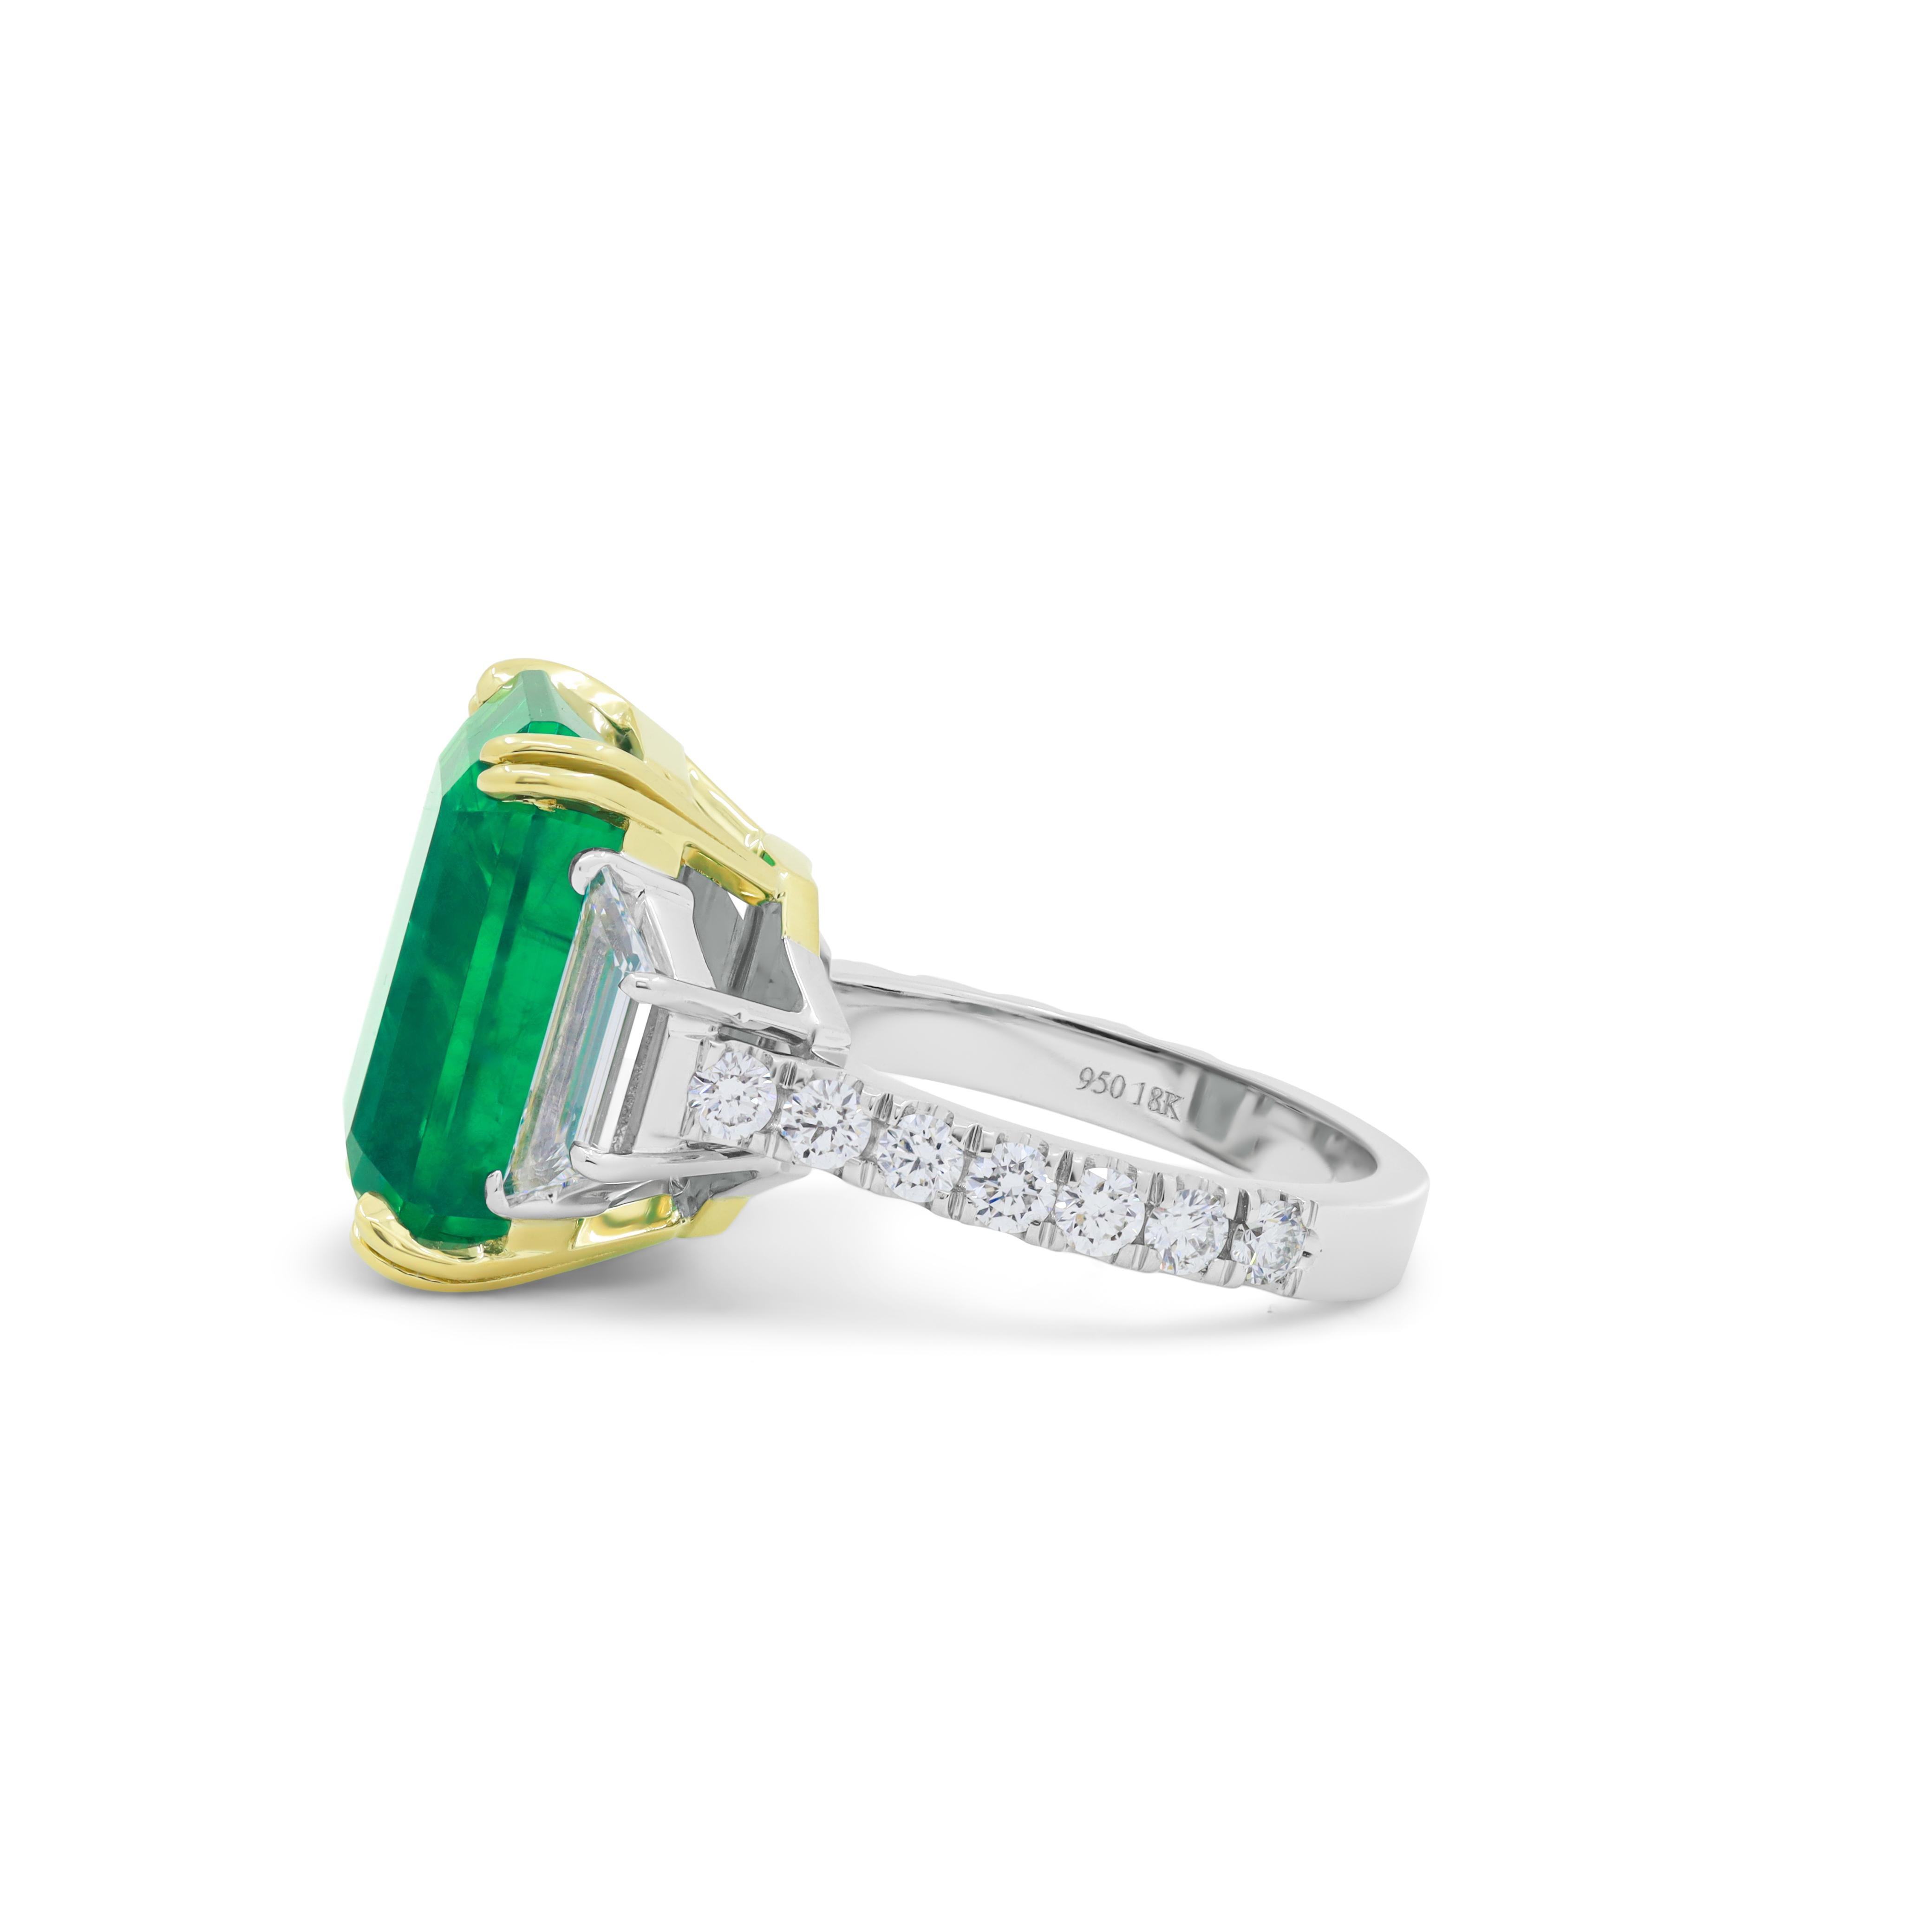 Diana M. Emerald Diamond ring 12.53ct Emerald with 1.60cts of diamonds Platinum  For Sale 1